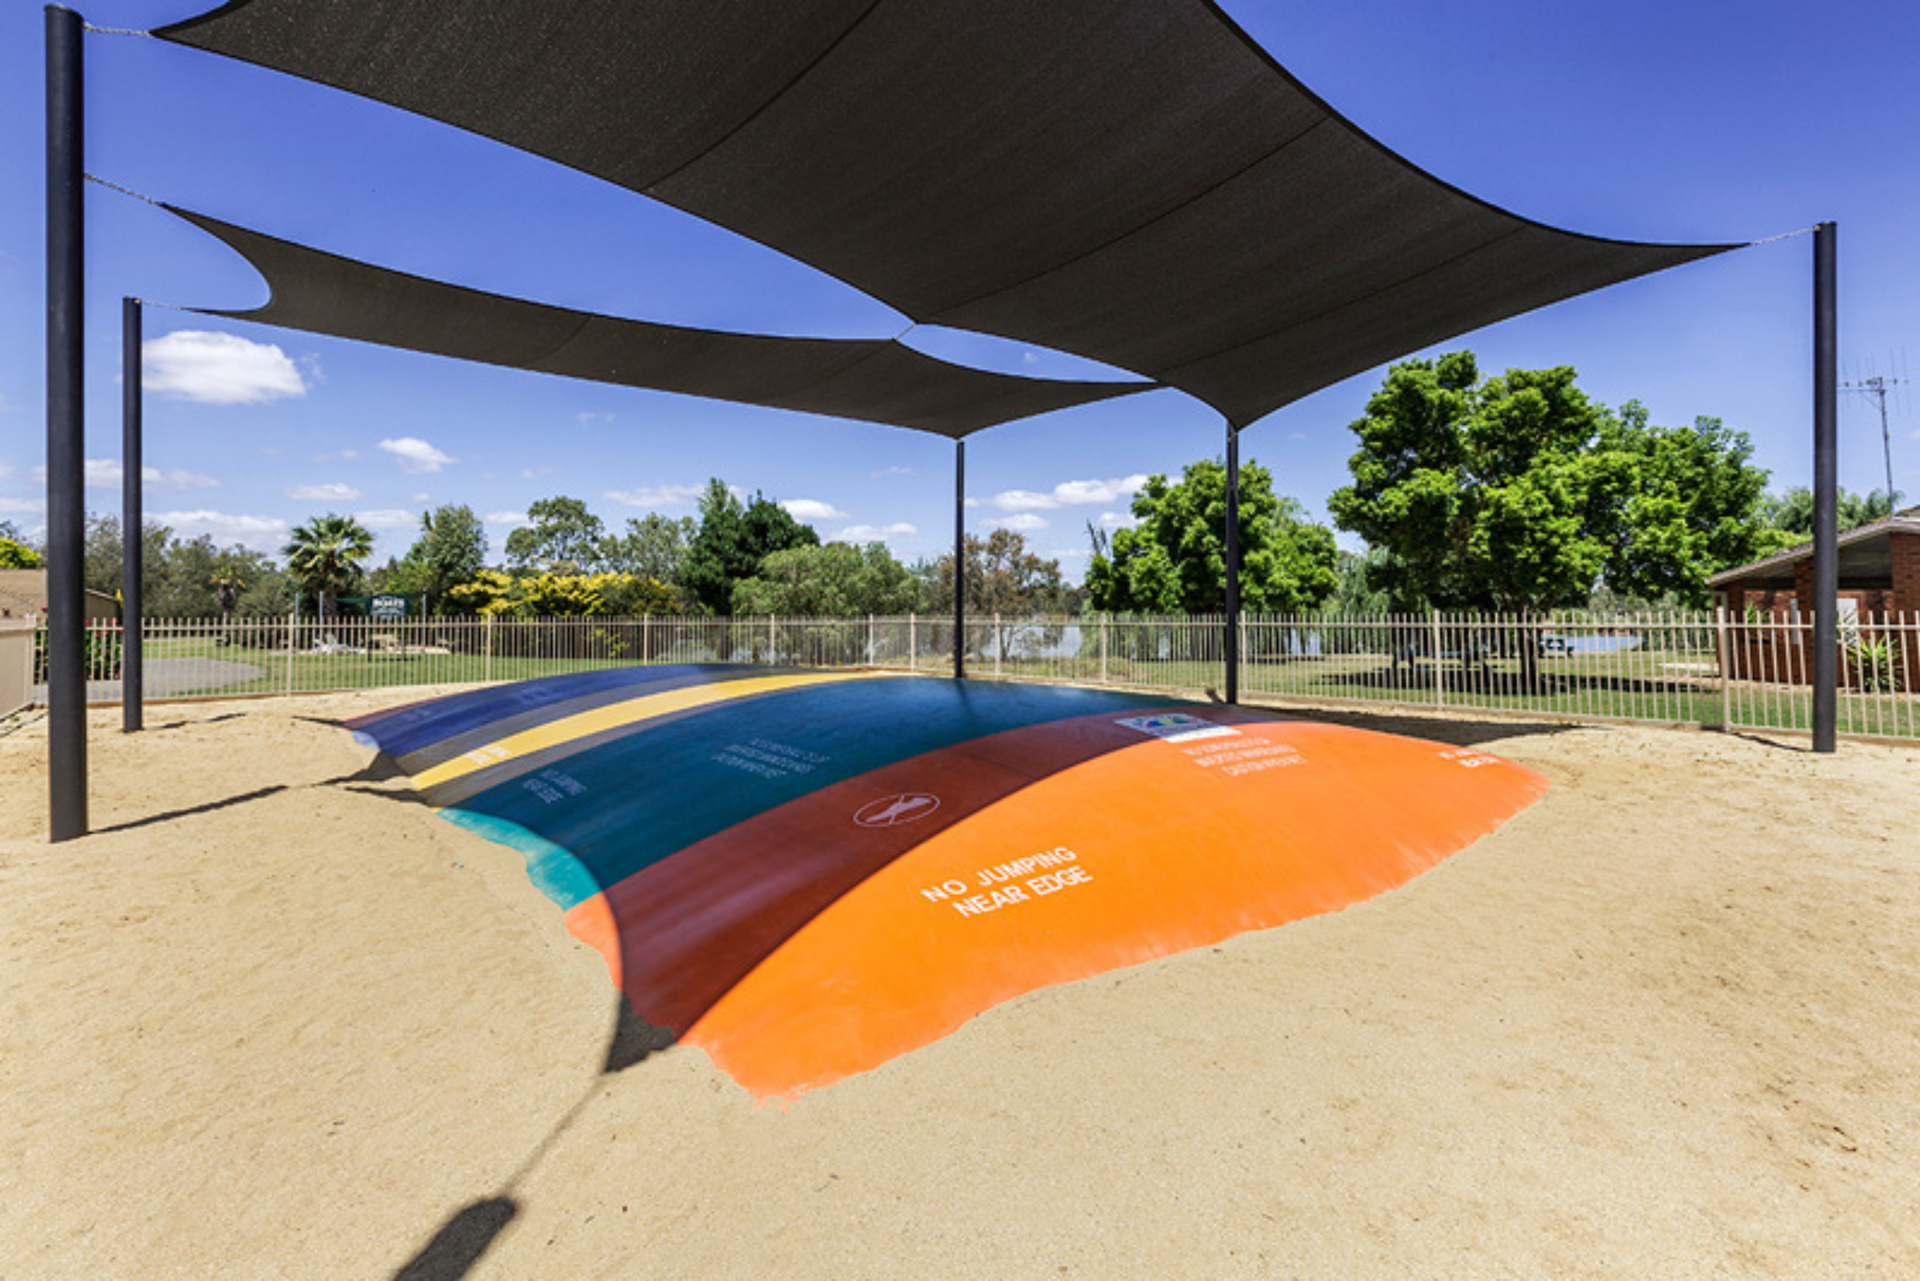 A rainbow colored jumping pillow in a park under a canopy.